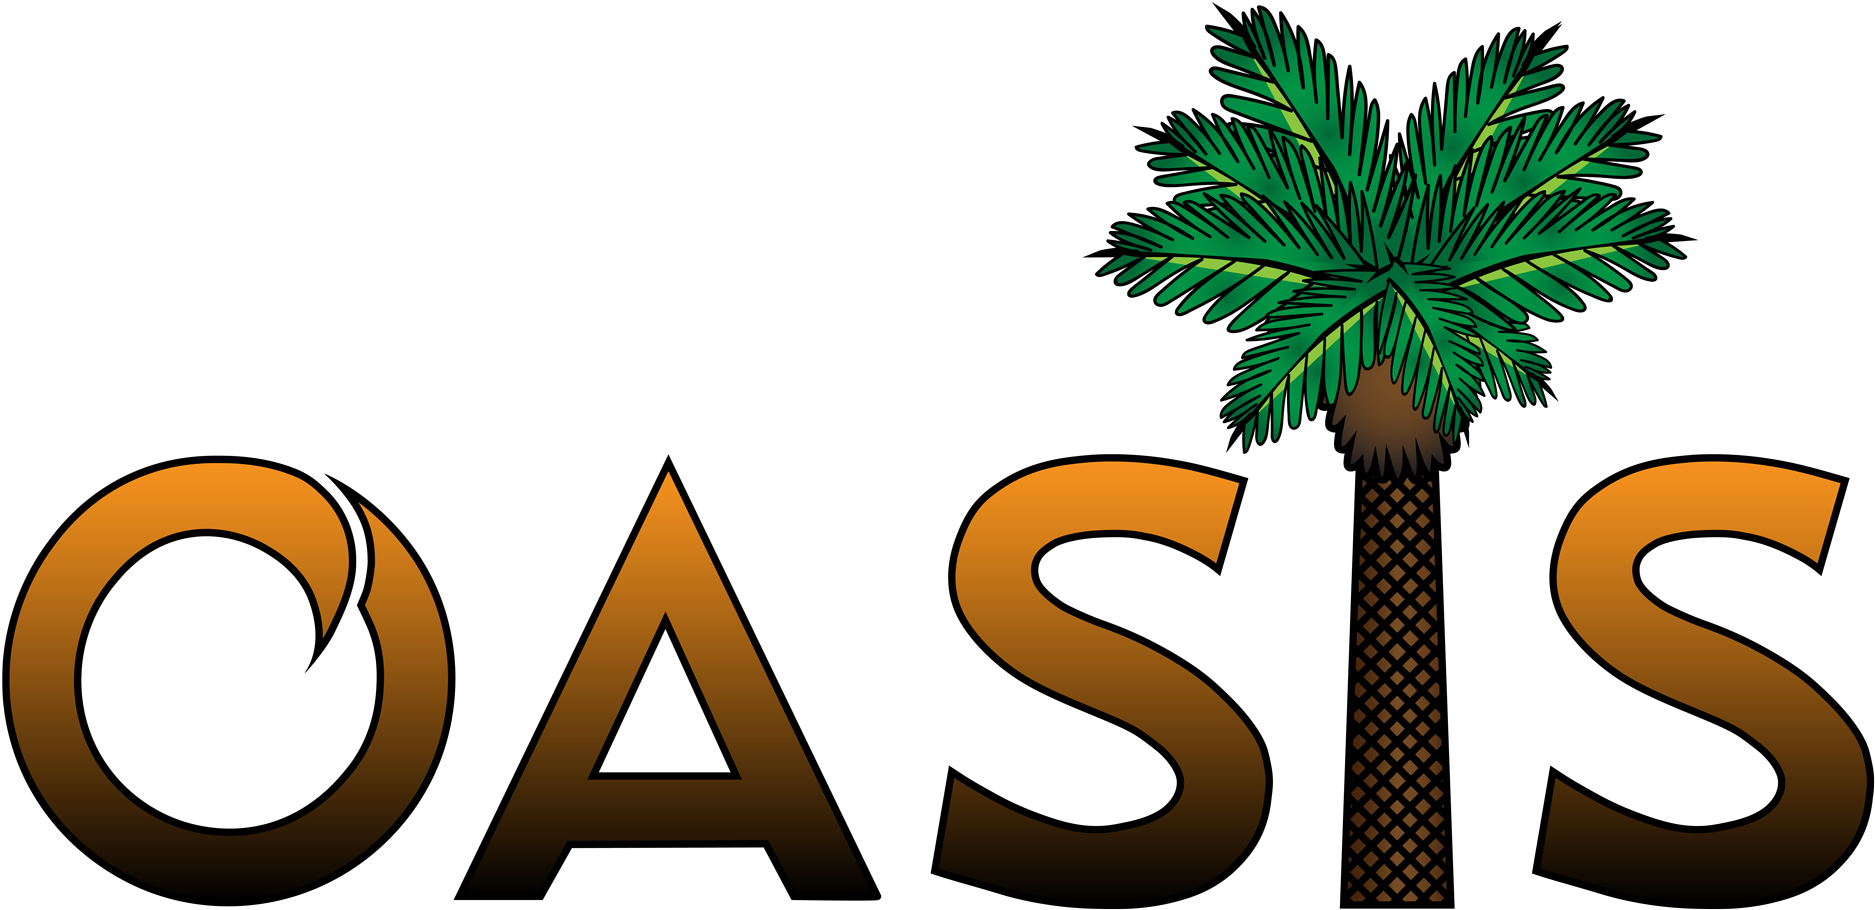 Oasis Logowith Palm Tree PNG image